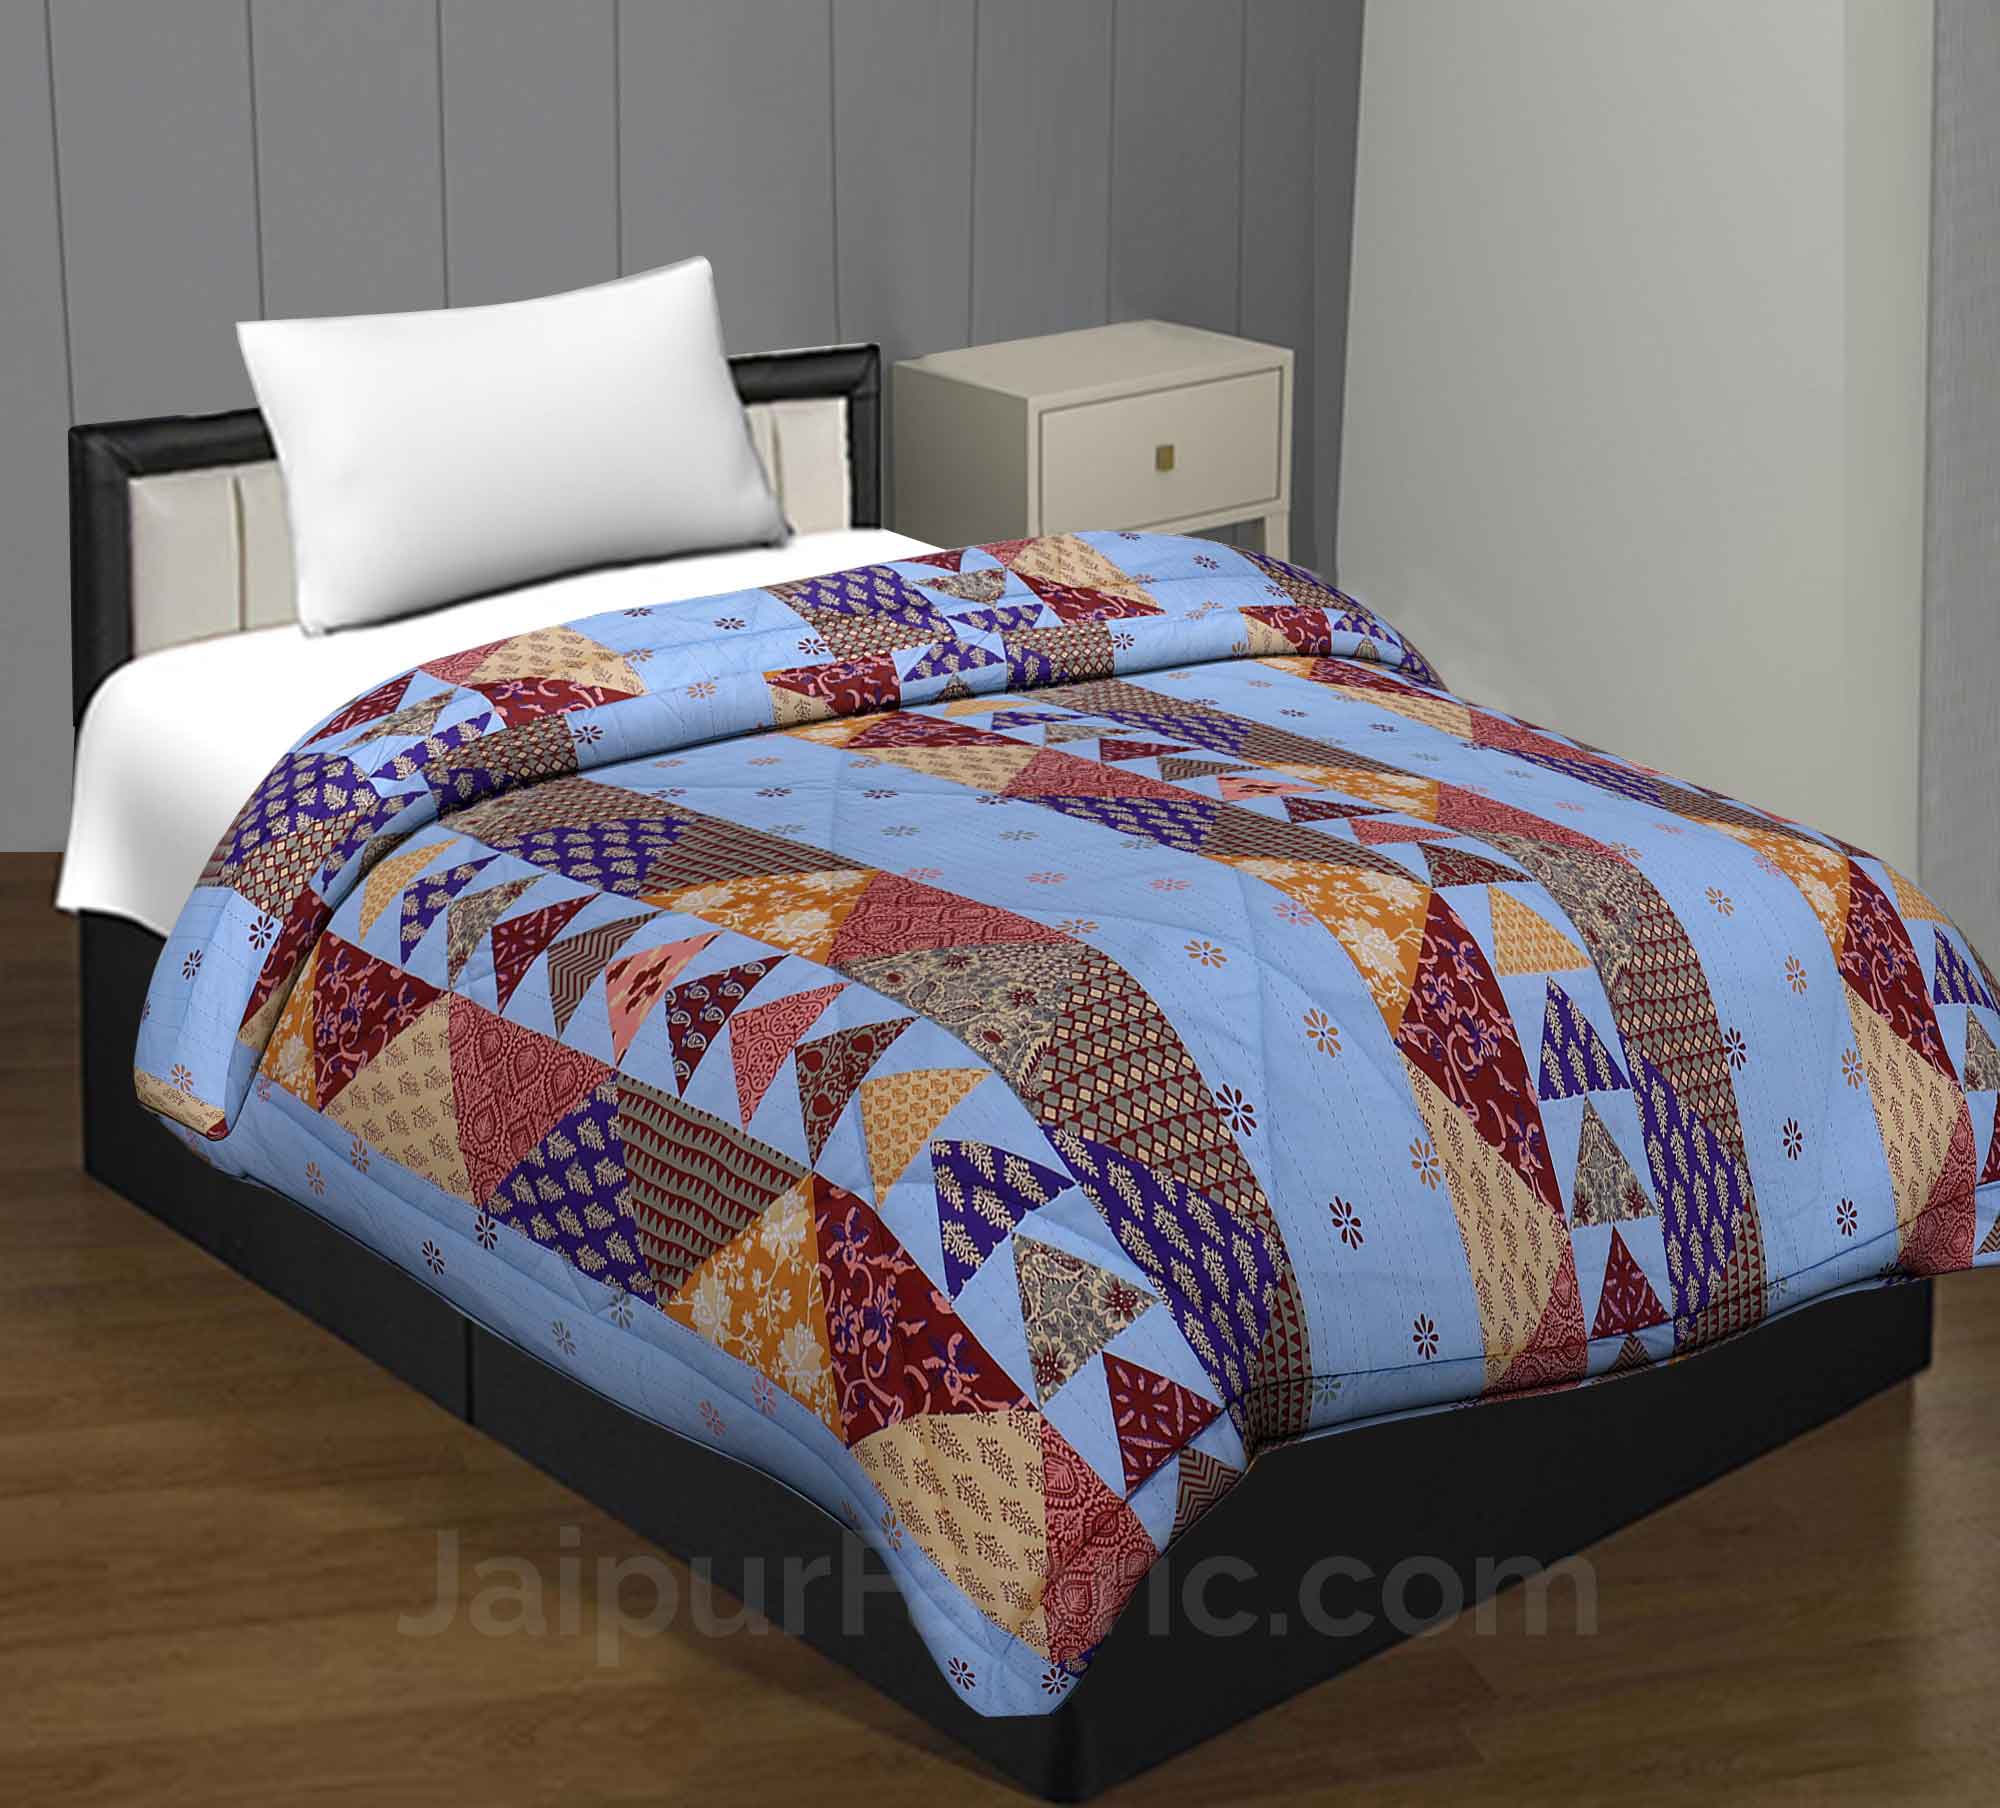 Blues Twill Cotton Single Bed With Colorful Patchwork Design Comforter